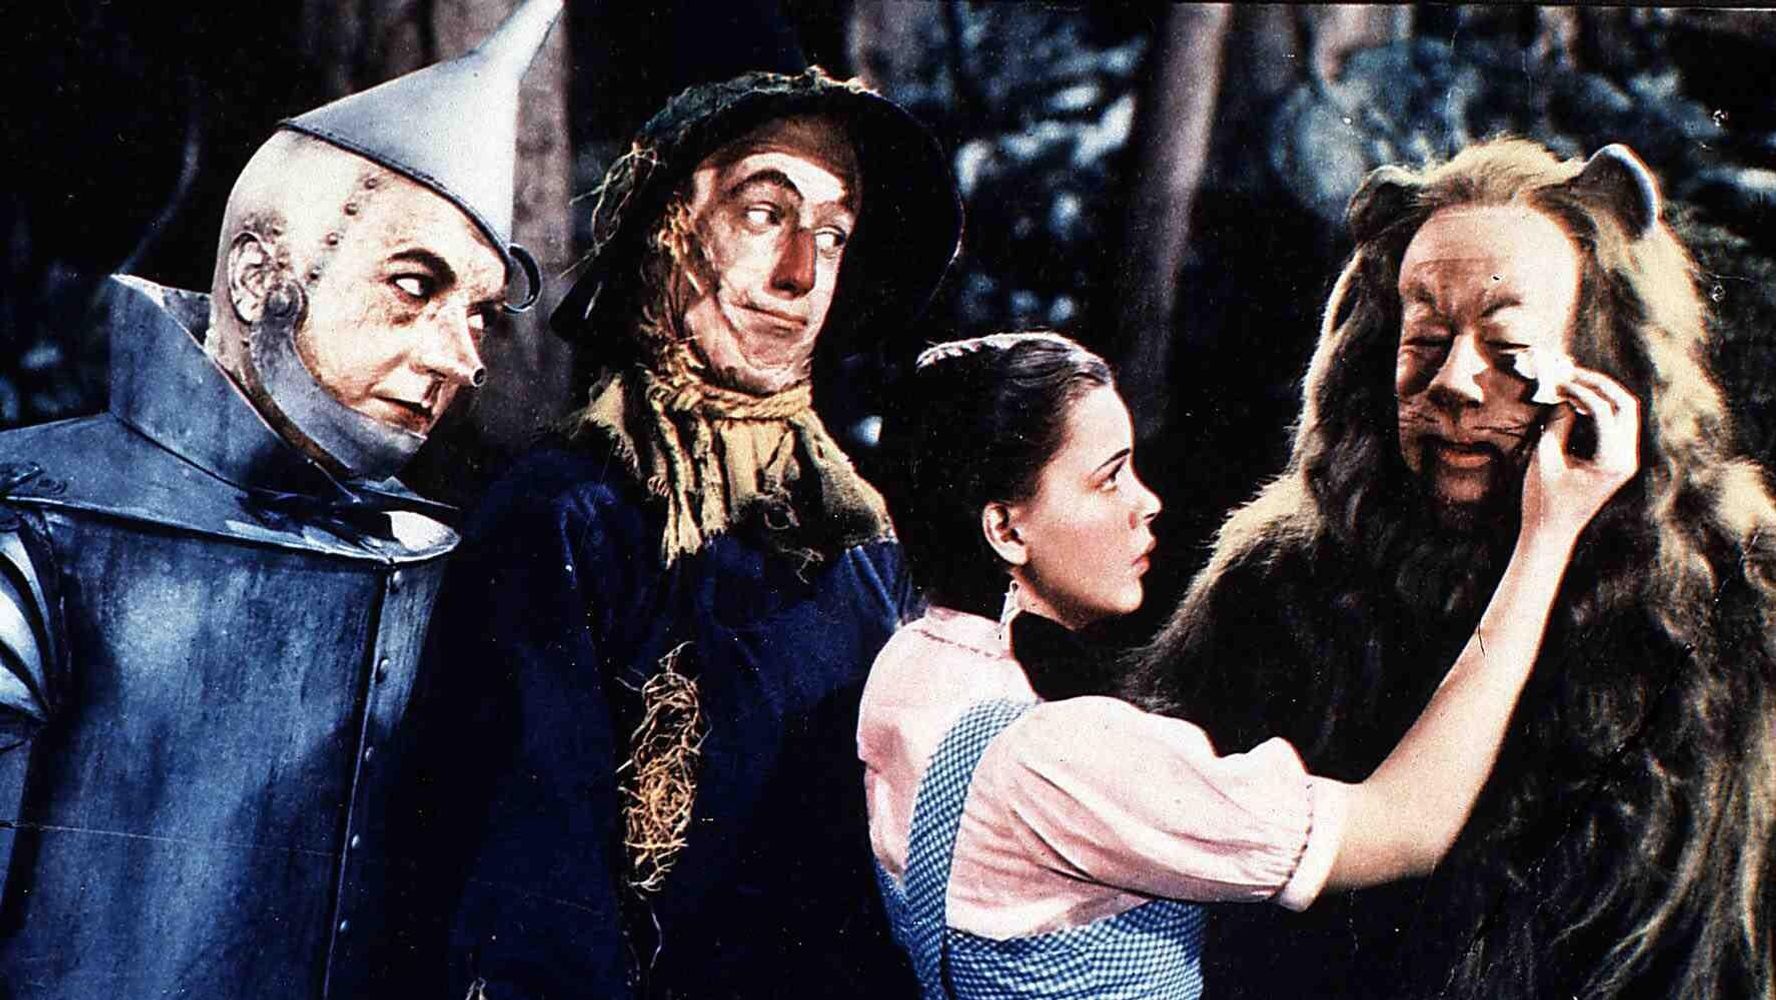 Wizard of Oz' remake planned with 'Watchmen' director